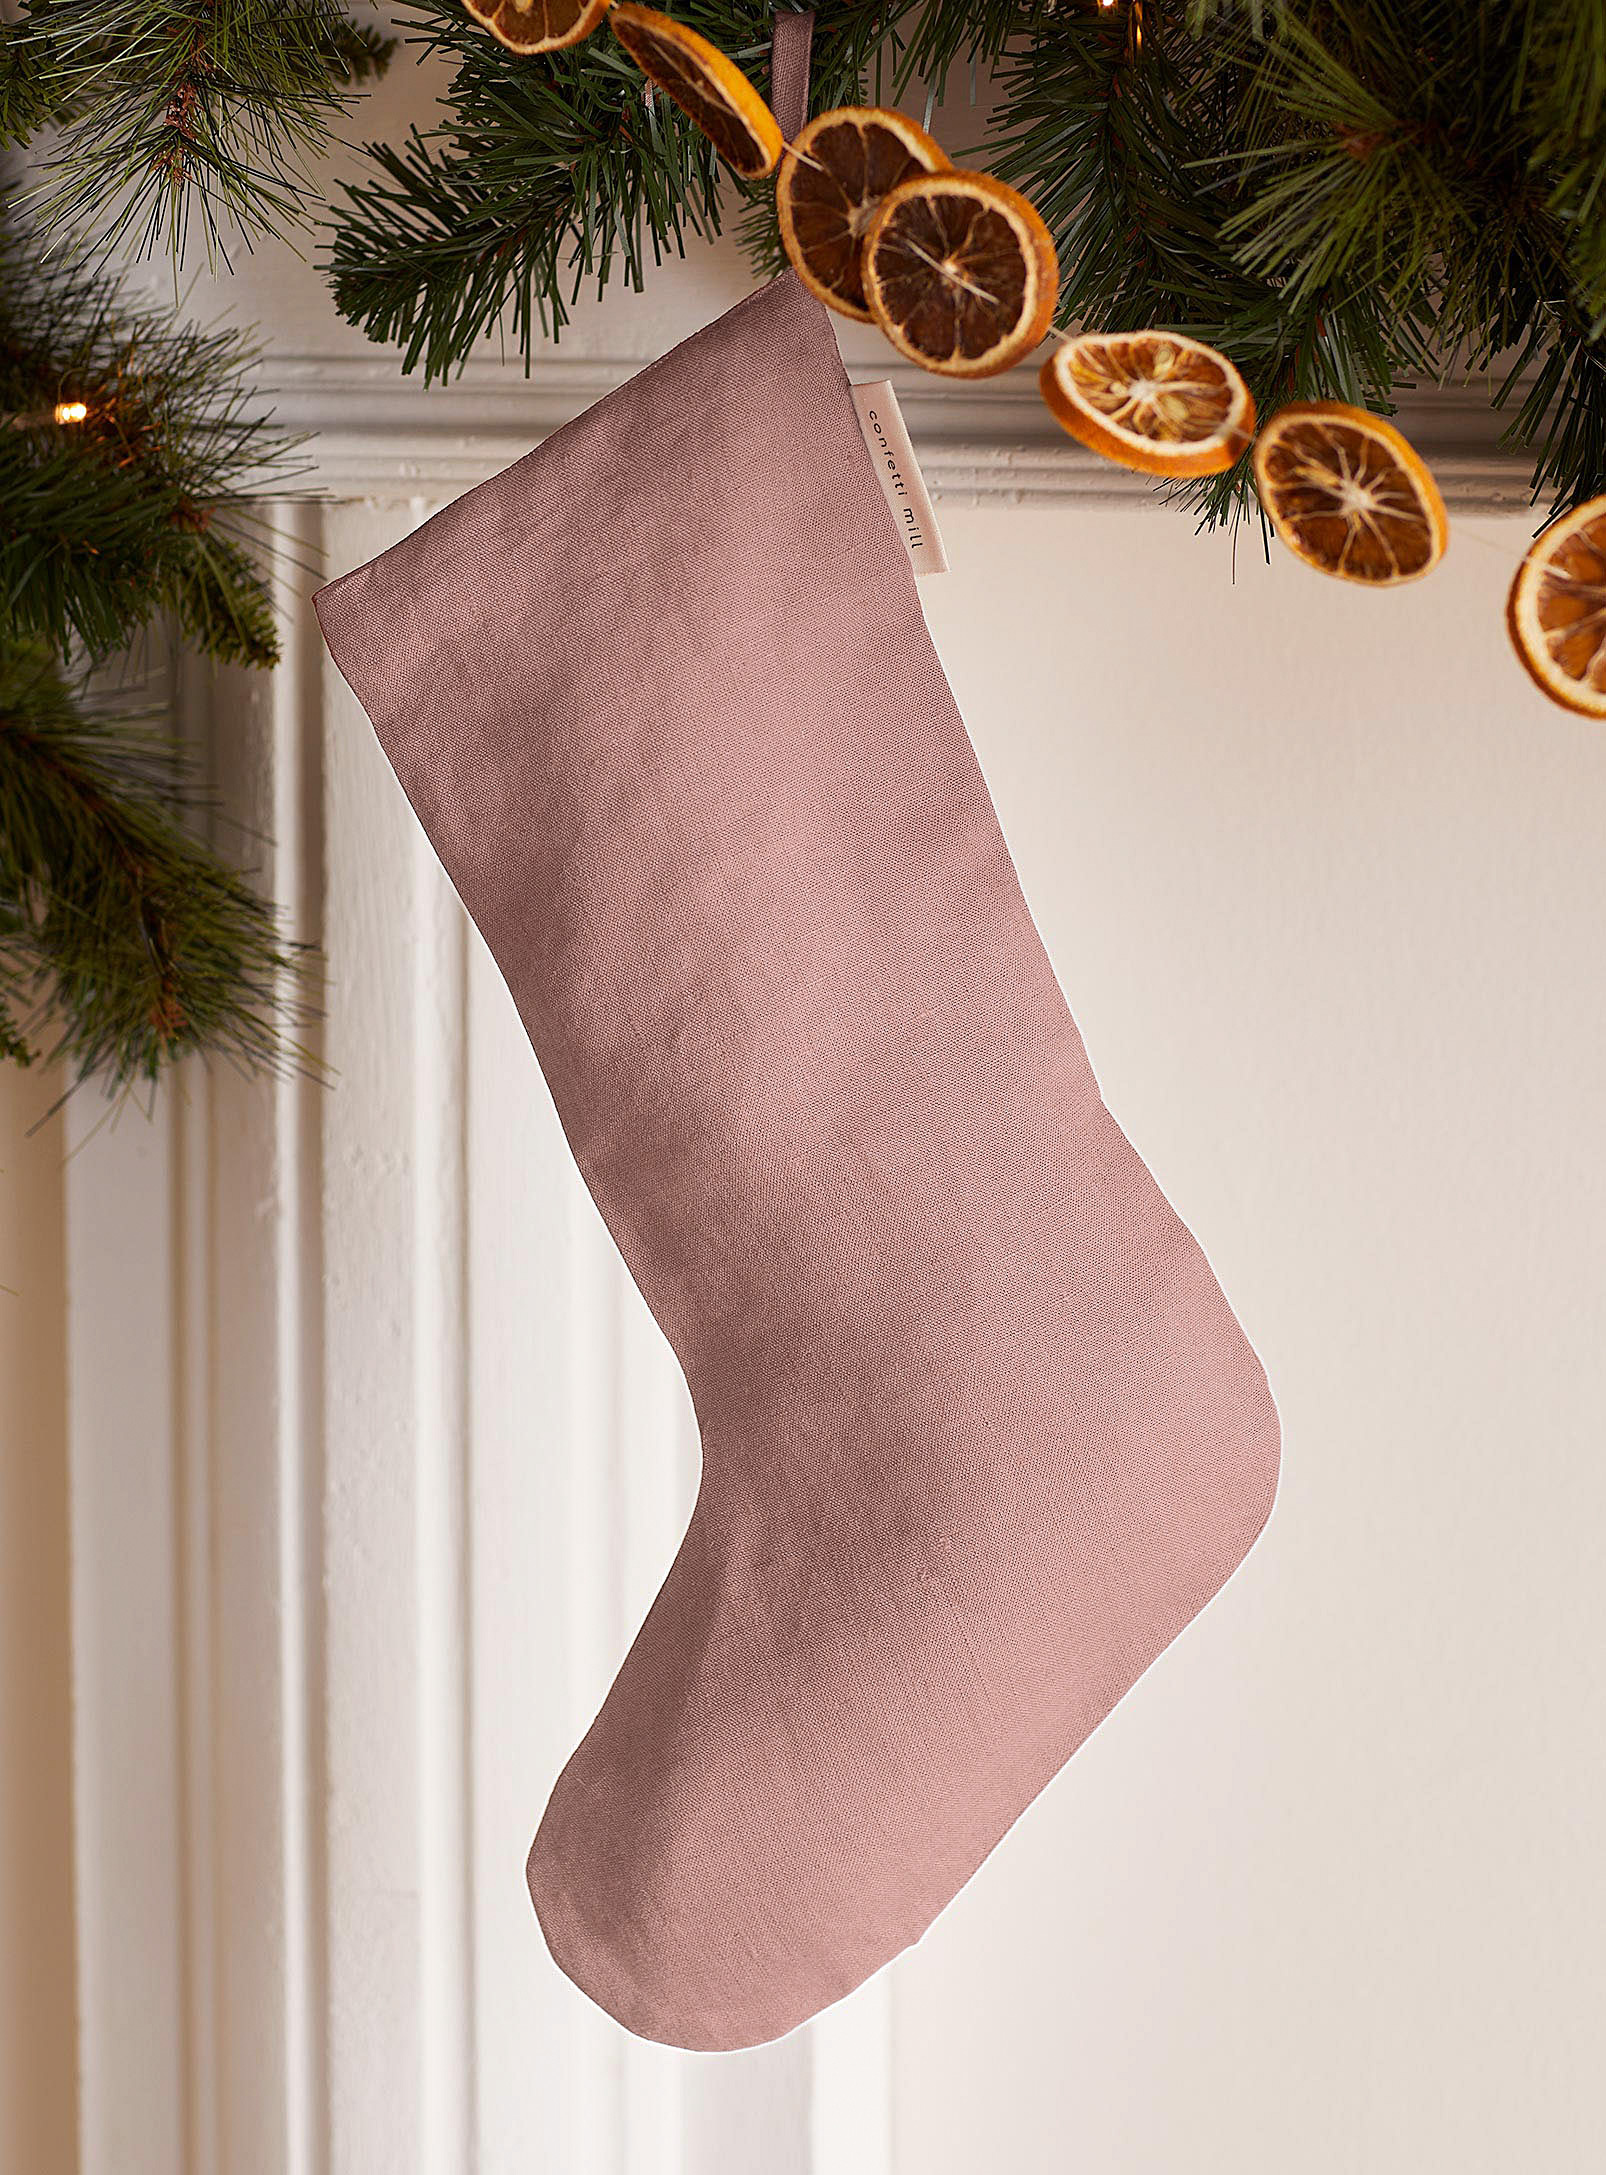 Confetti Mill Pure Linen Christmas Stocking In Dusky Pink